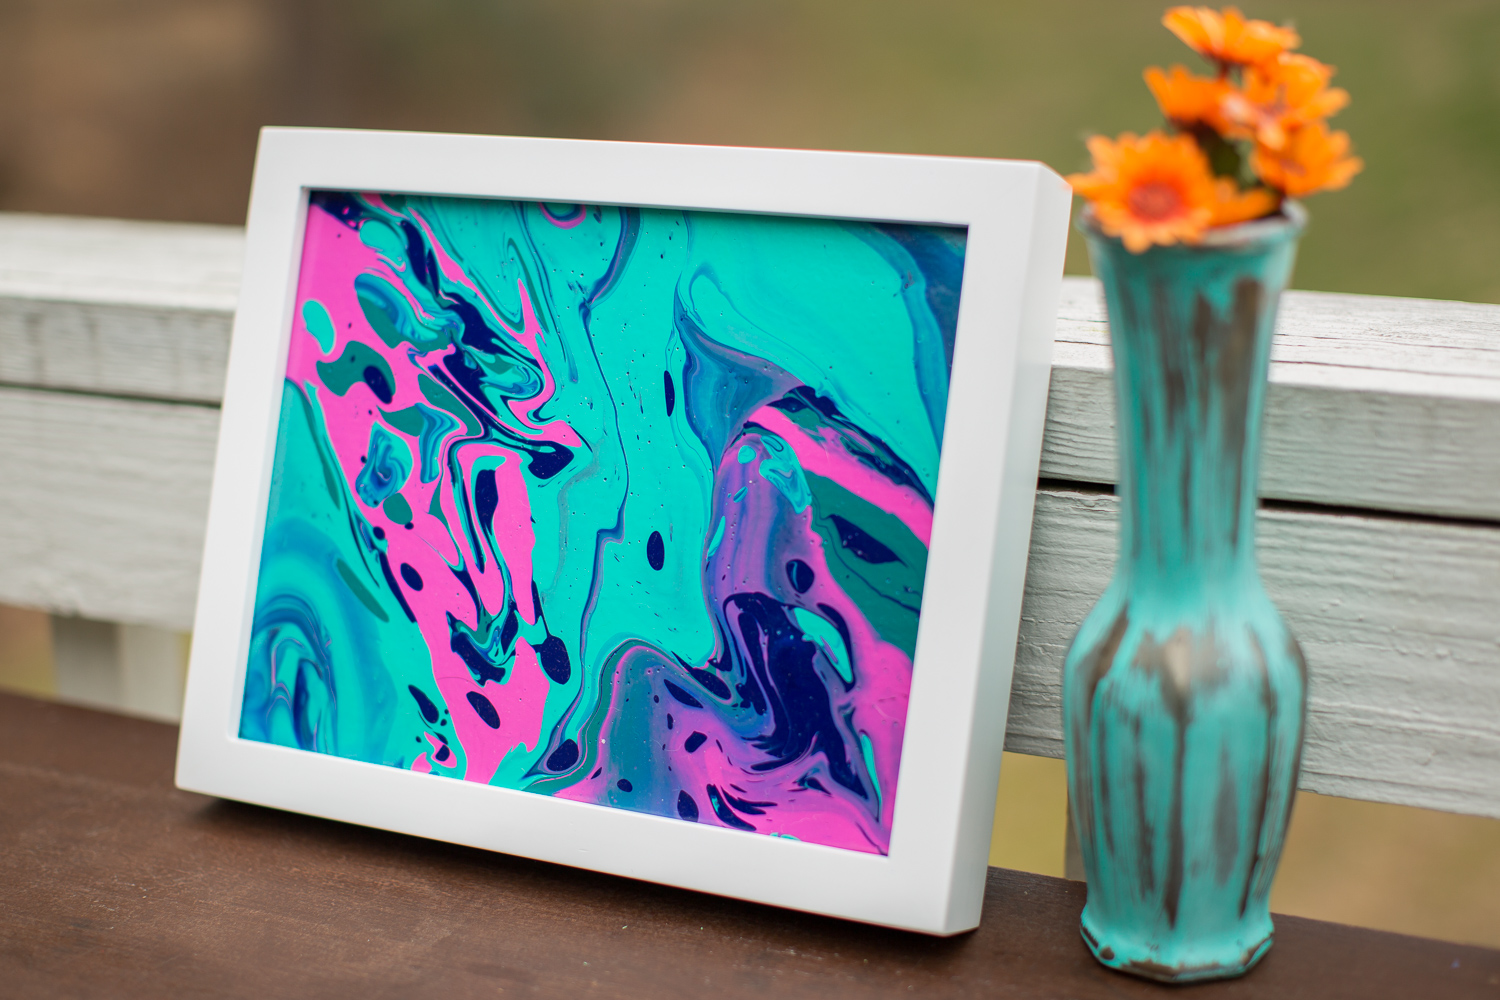 Abstract aqua and pink pour painting by North Carolina artist Courtney Potter.